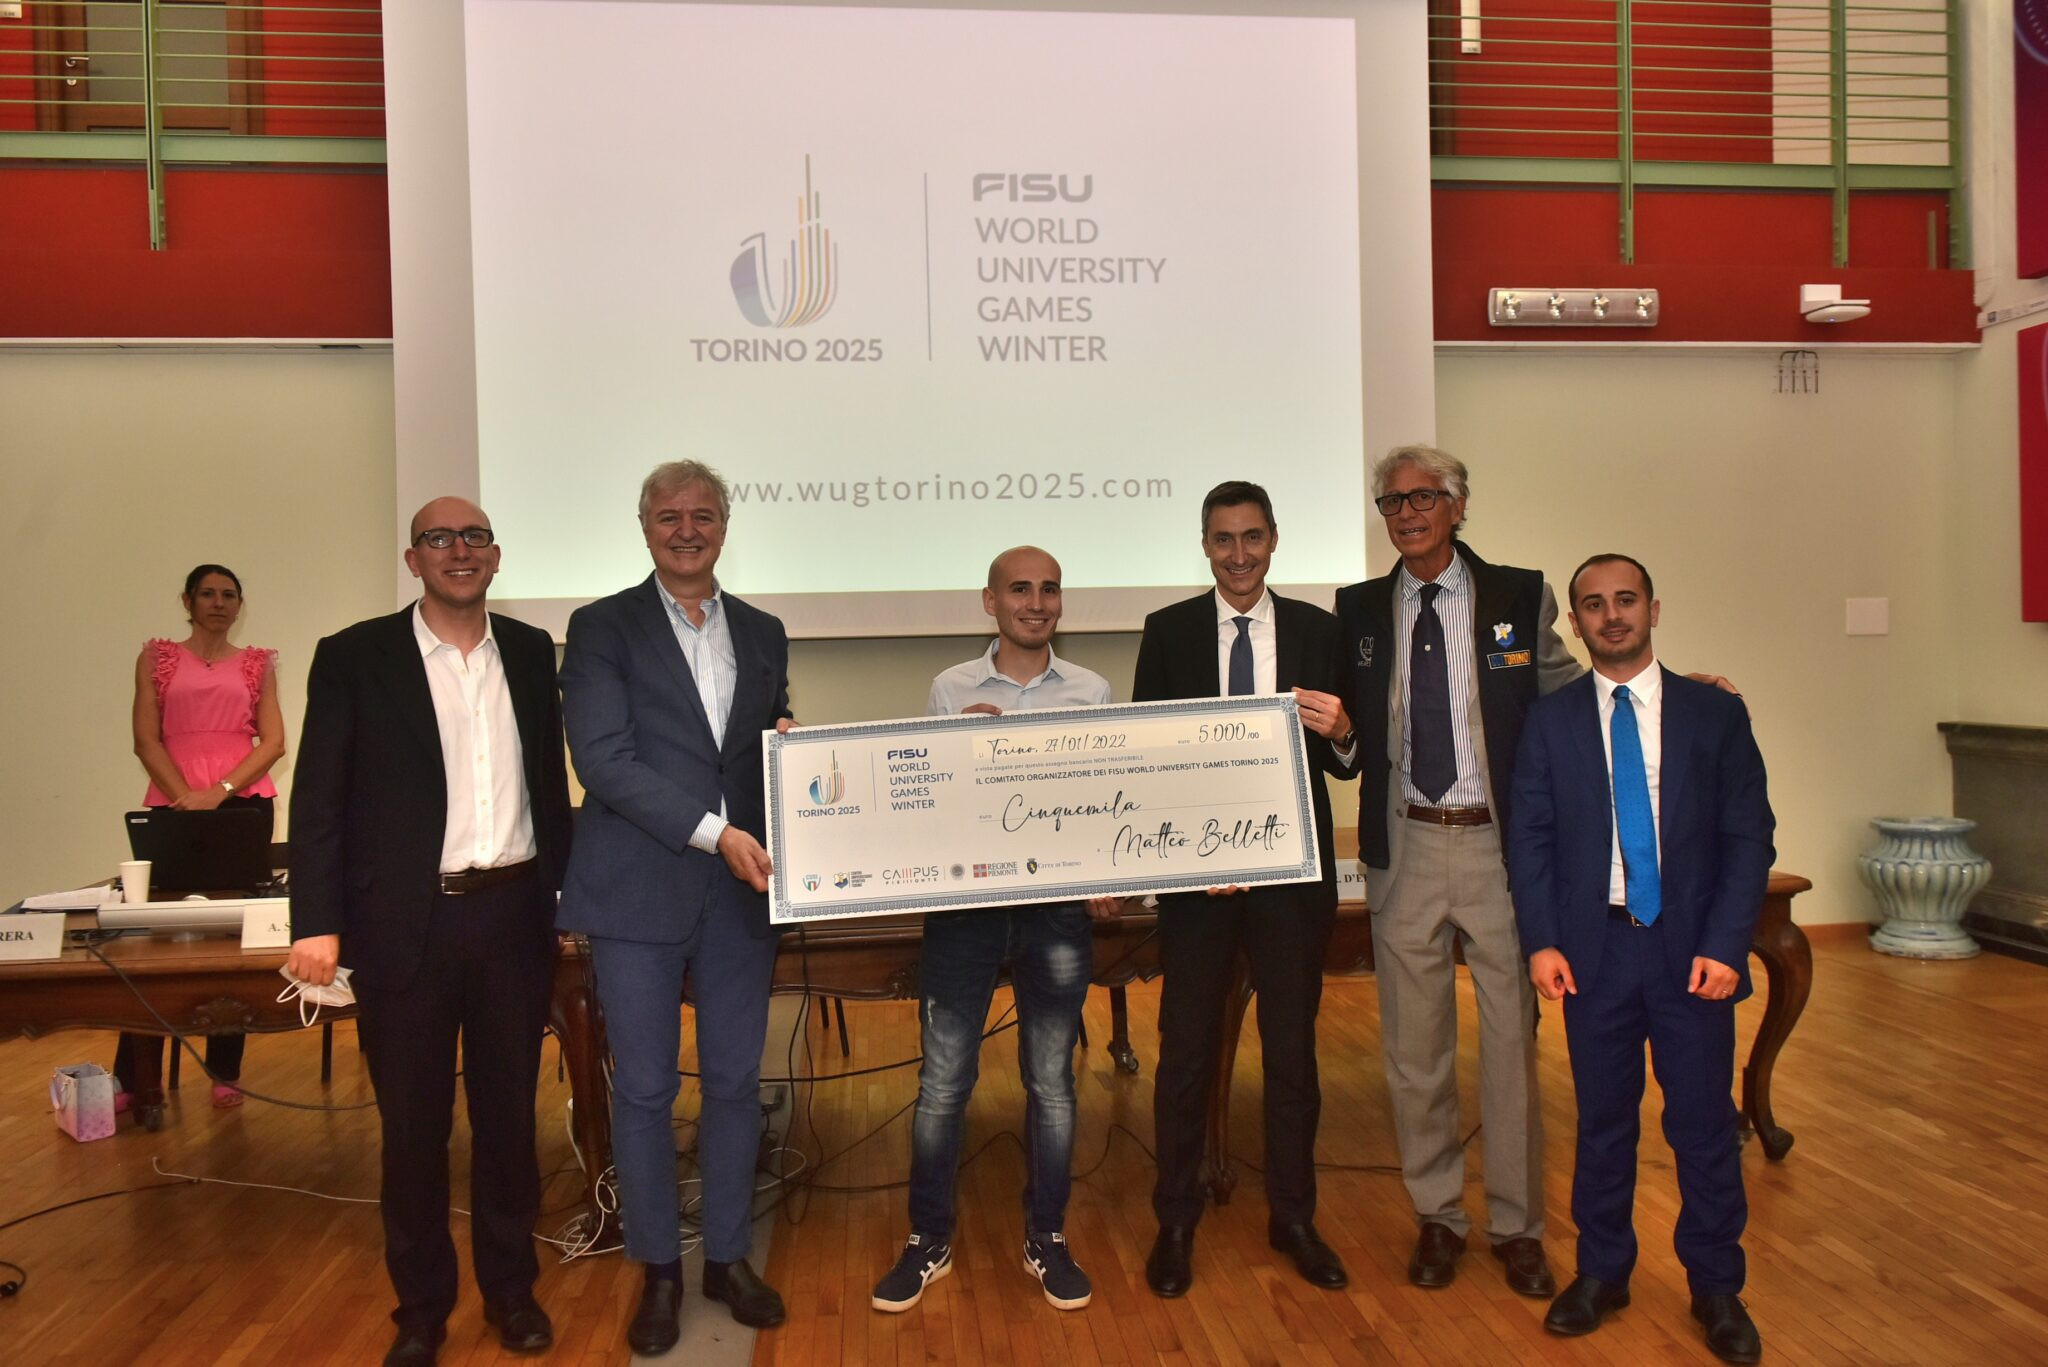 Turin 2025 logo designer presented with prize cheque